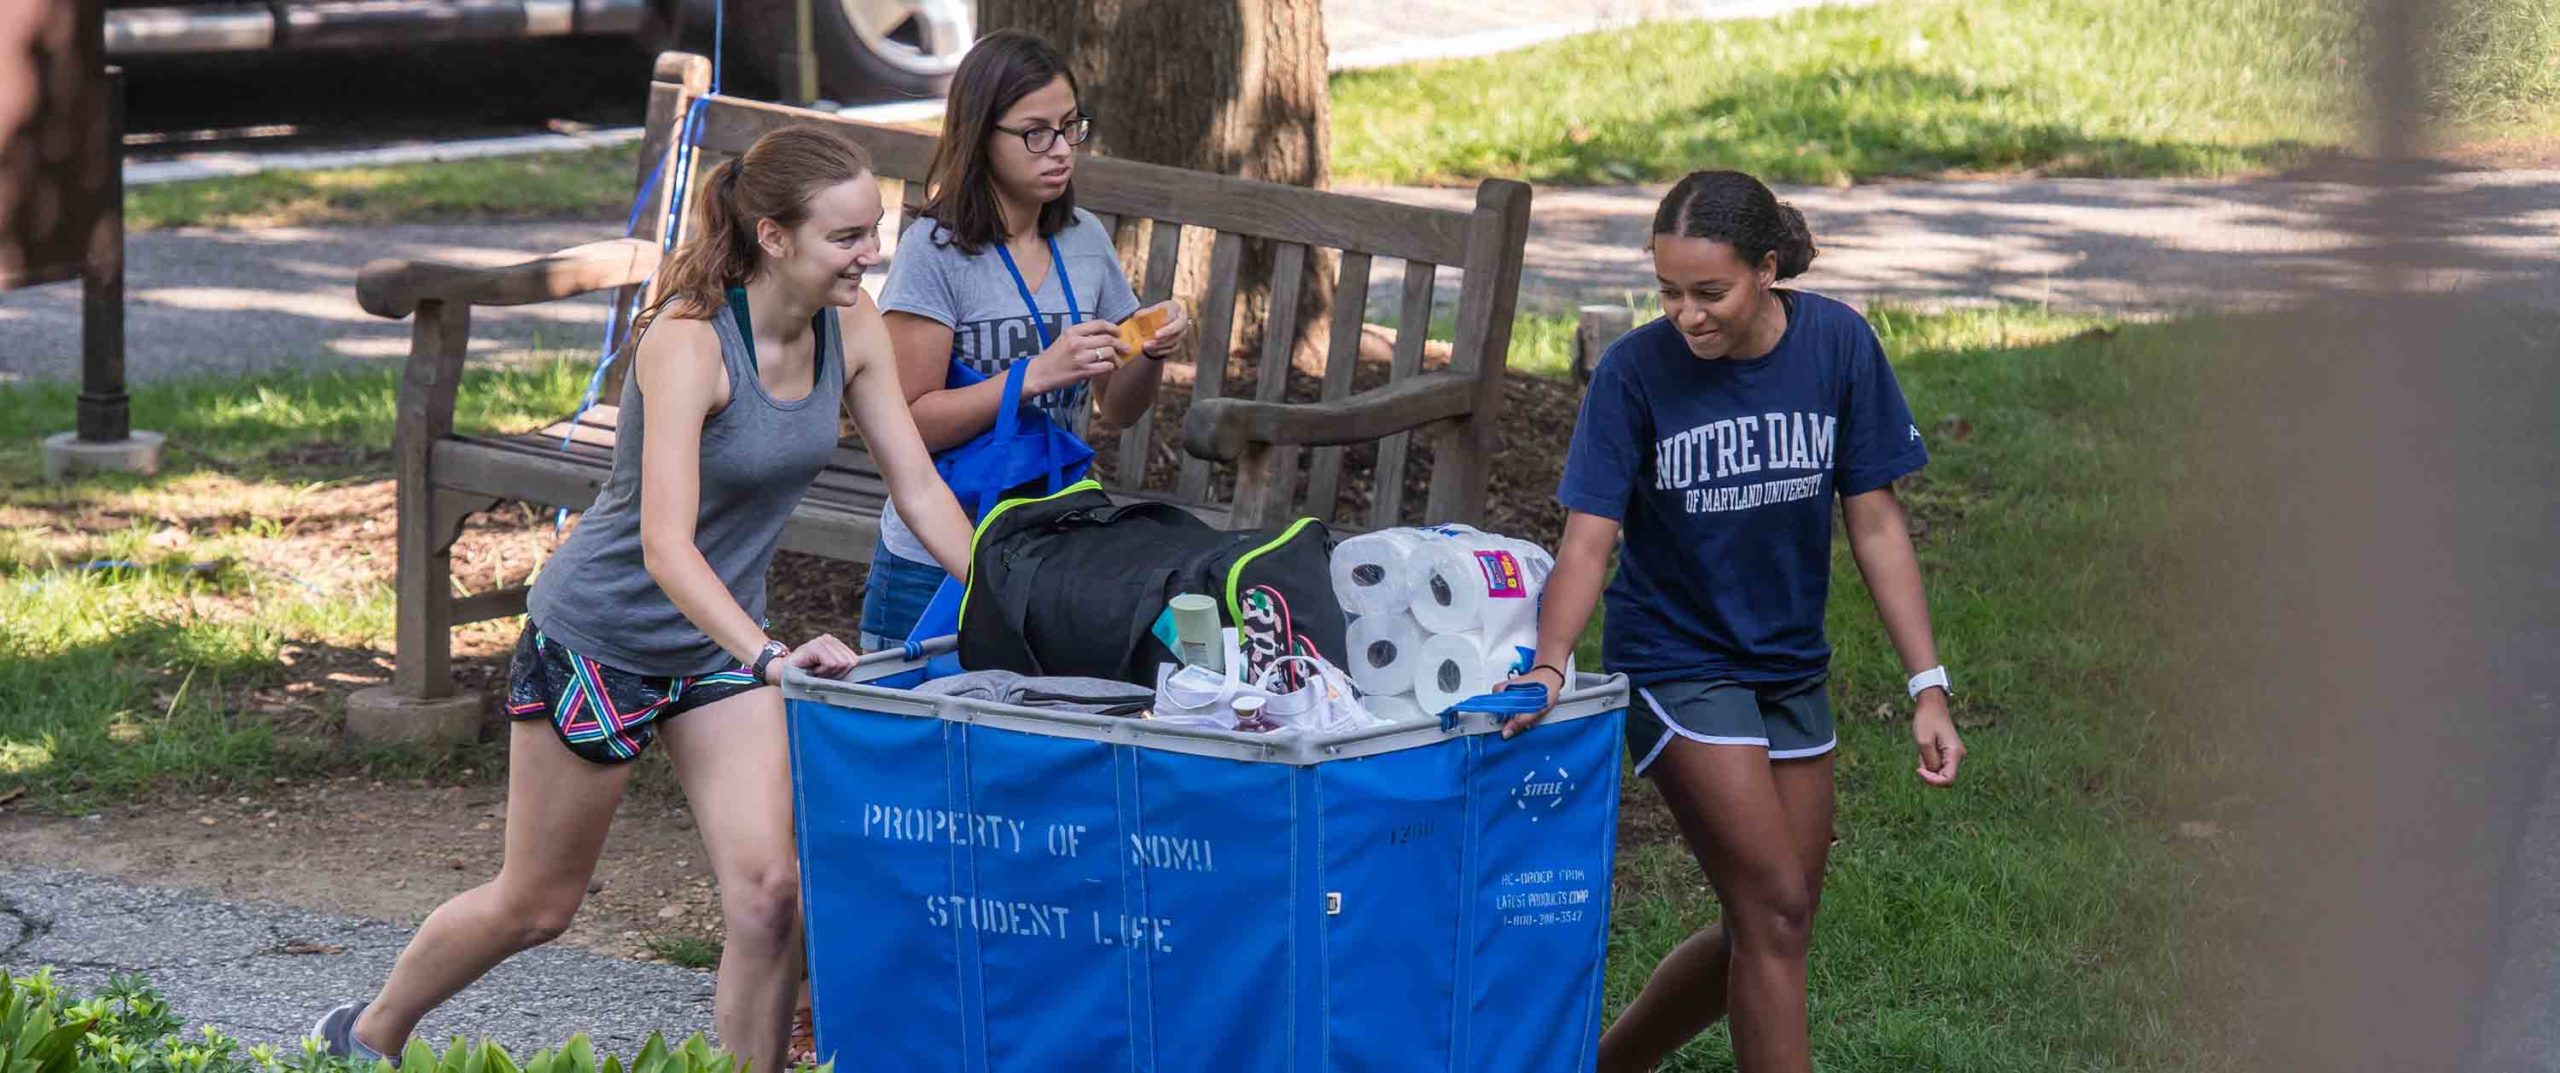 Notre Dame of Maryland University welcomes biggest freshman class ever 